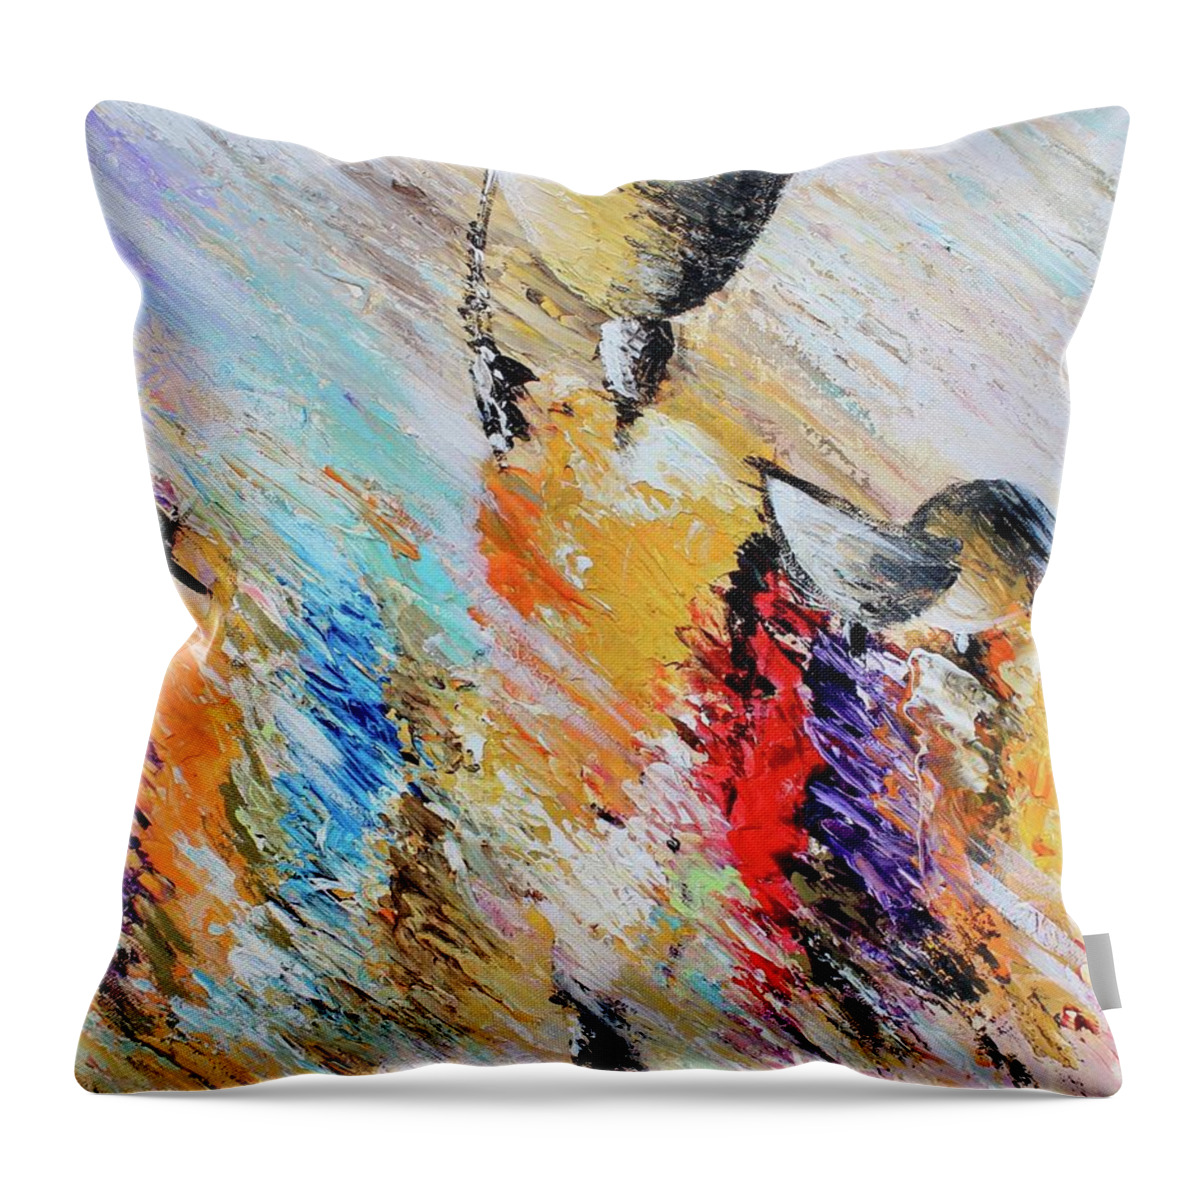 Africa Throw Pillow featuring the painting Shadow Community by Nii Hylton